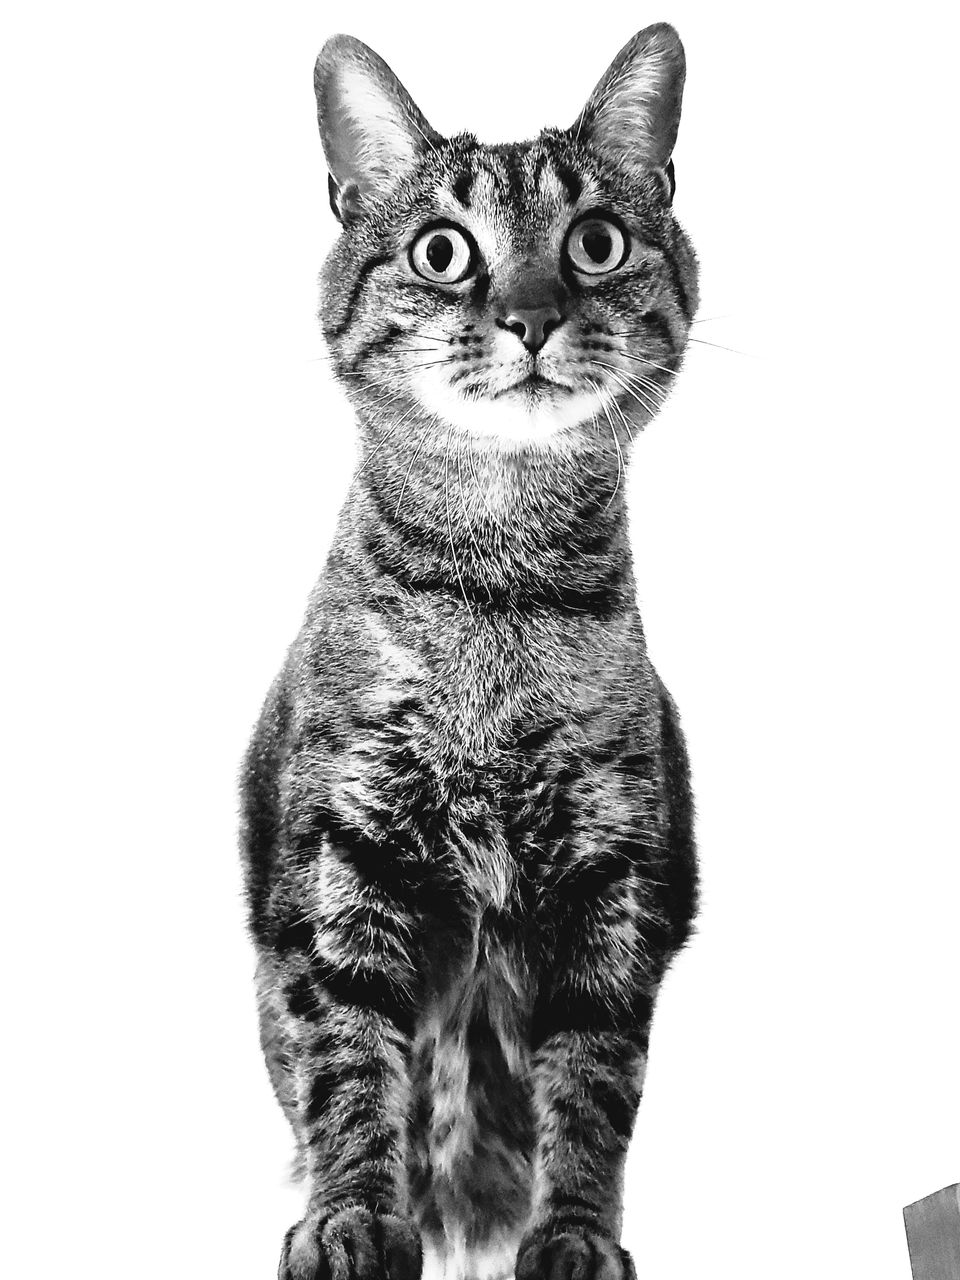 cat, animal, animal themes, mammal, pet, domestic animals, one animal, domestic cat, white background, feline, portrait, small to medium-sized cats, felidae, carnivore, black and white, cut out, looking at camera, studio shot, whiskers, no people, sitting, indoors, cute, looking